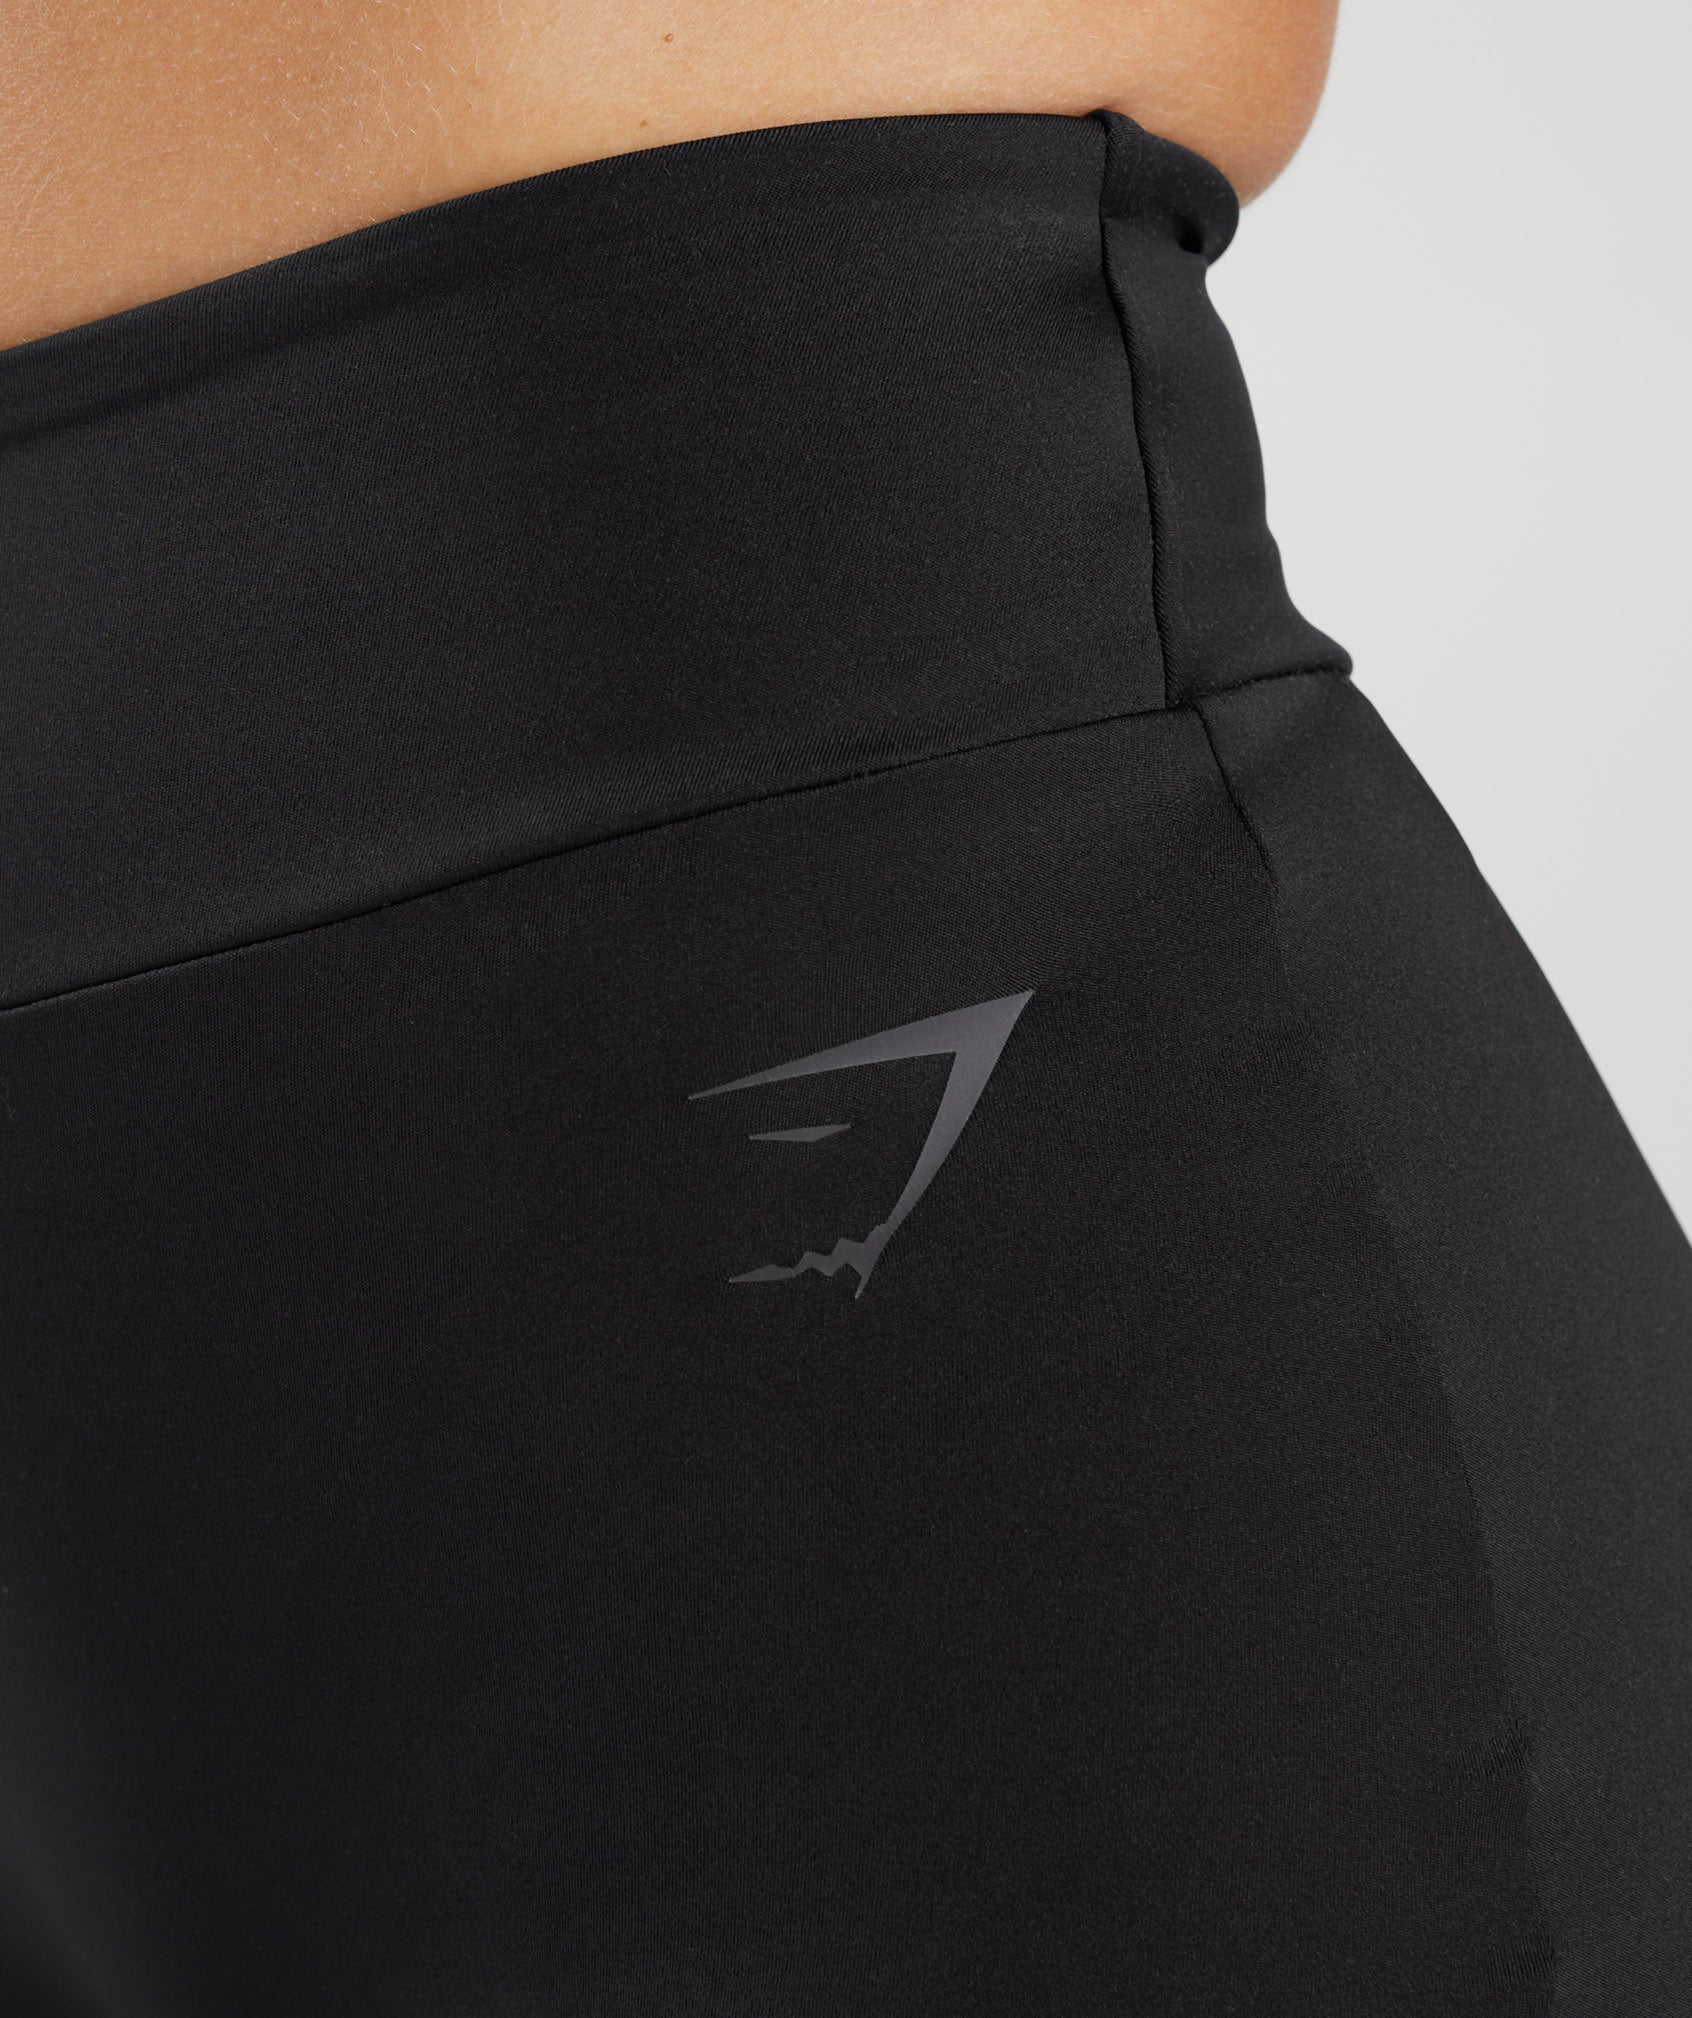 GS Power Original Tight Shorts in Black - view 6